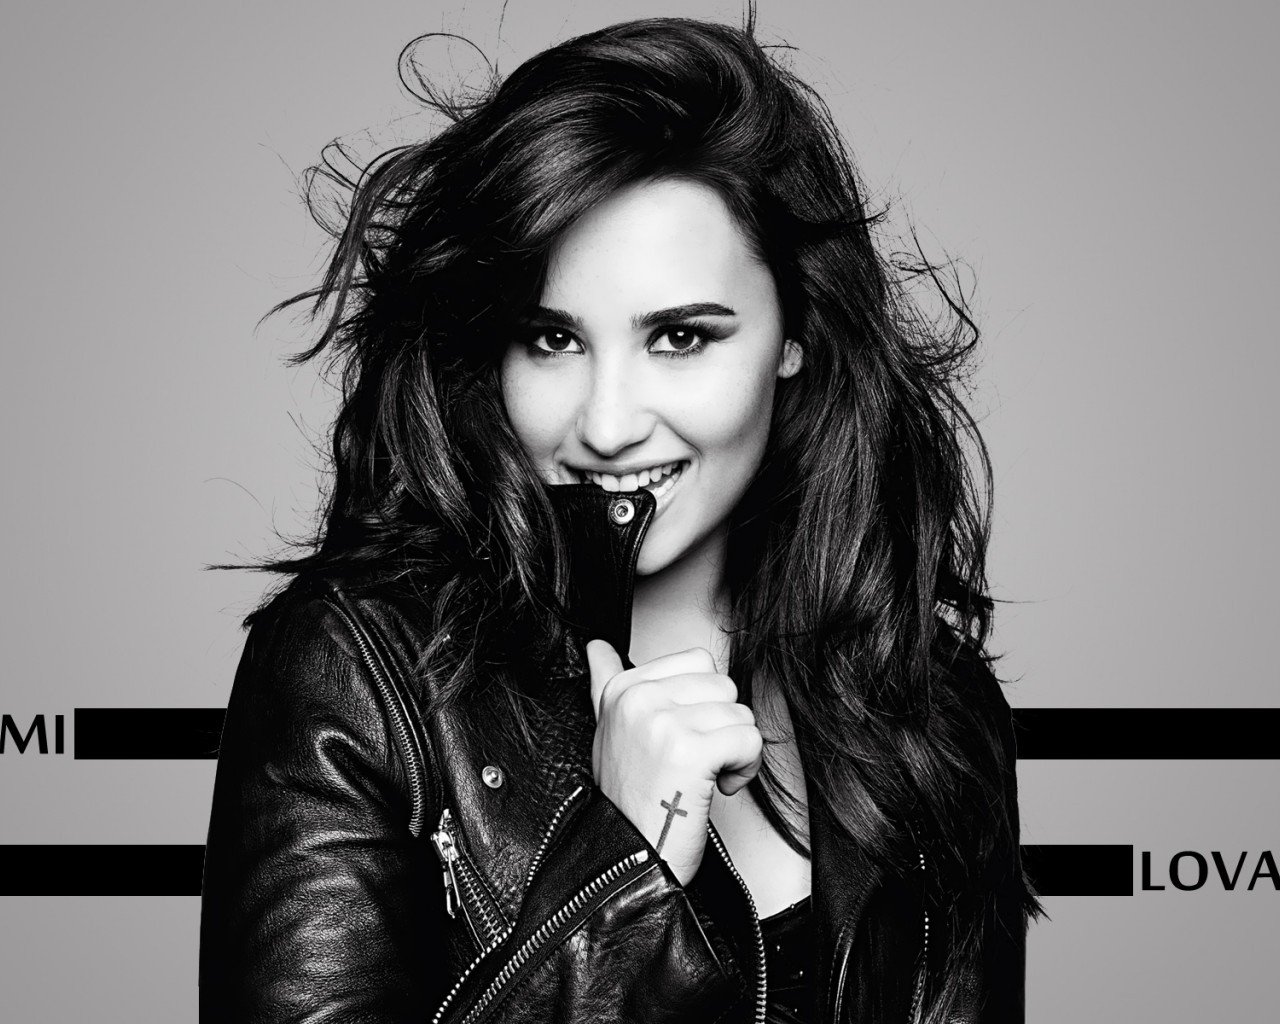 Demi Lovato Shooting for 1280 x 1024 resolution